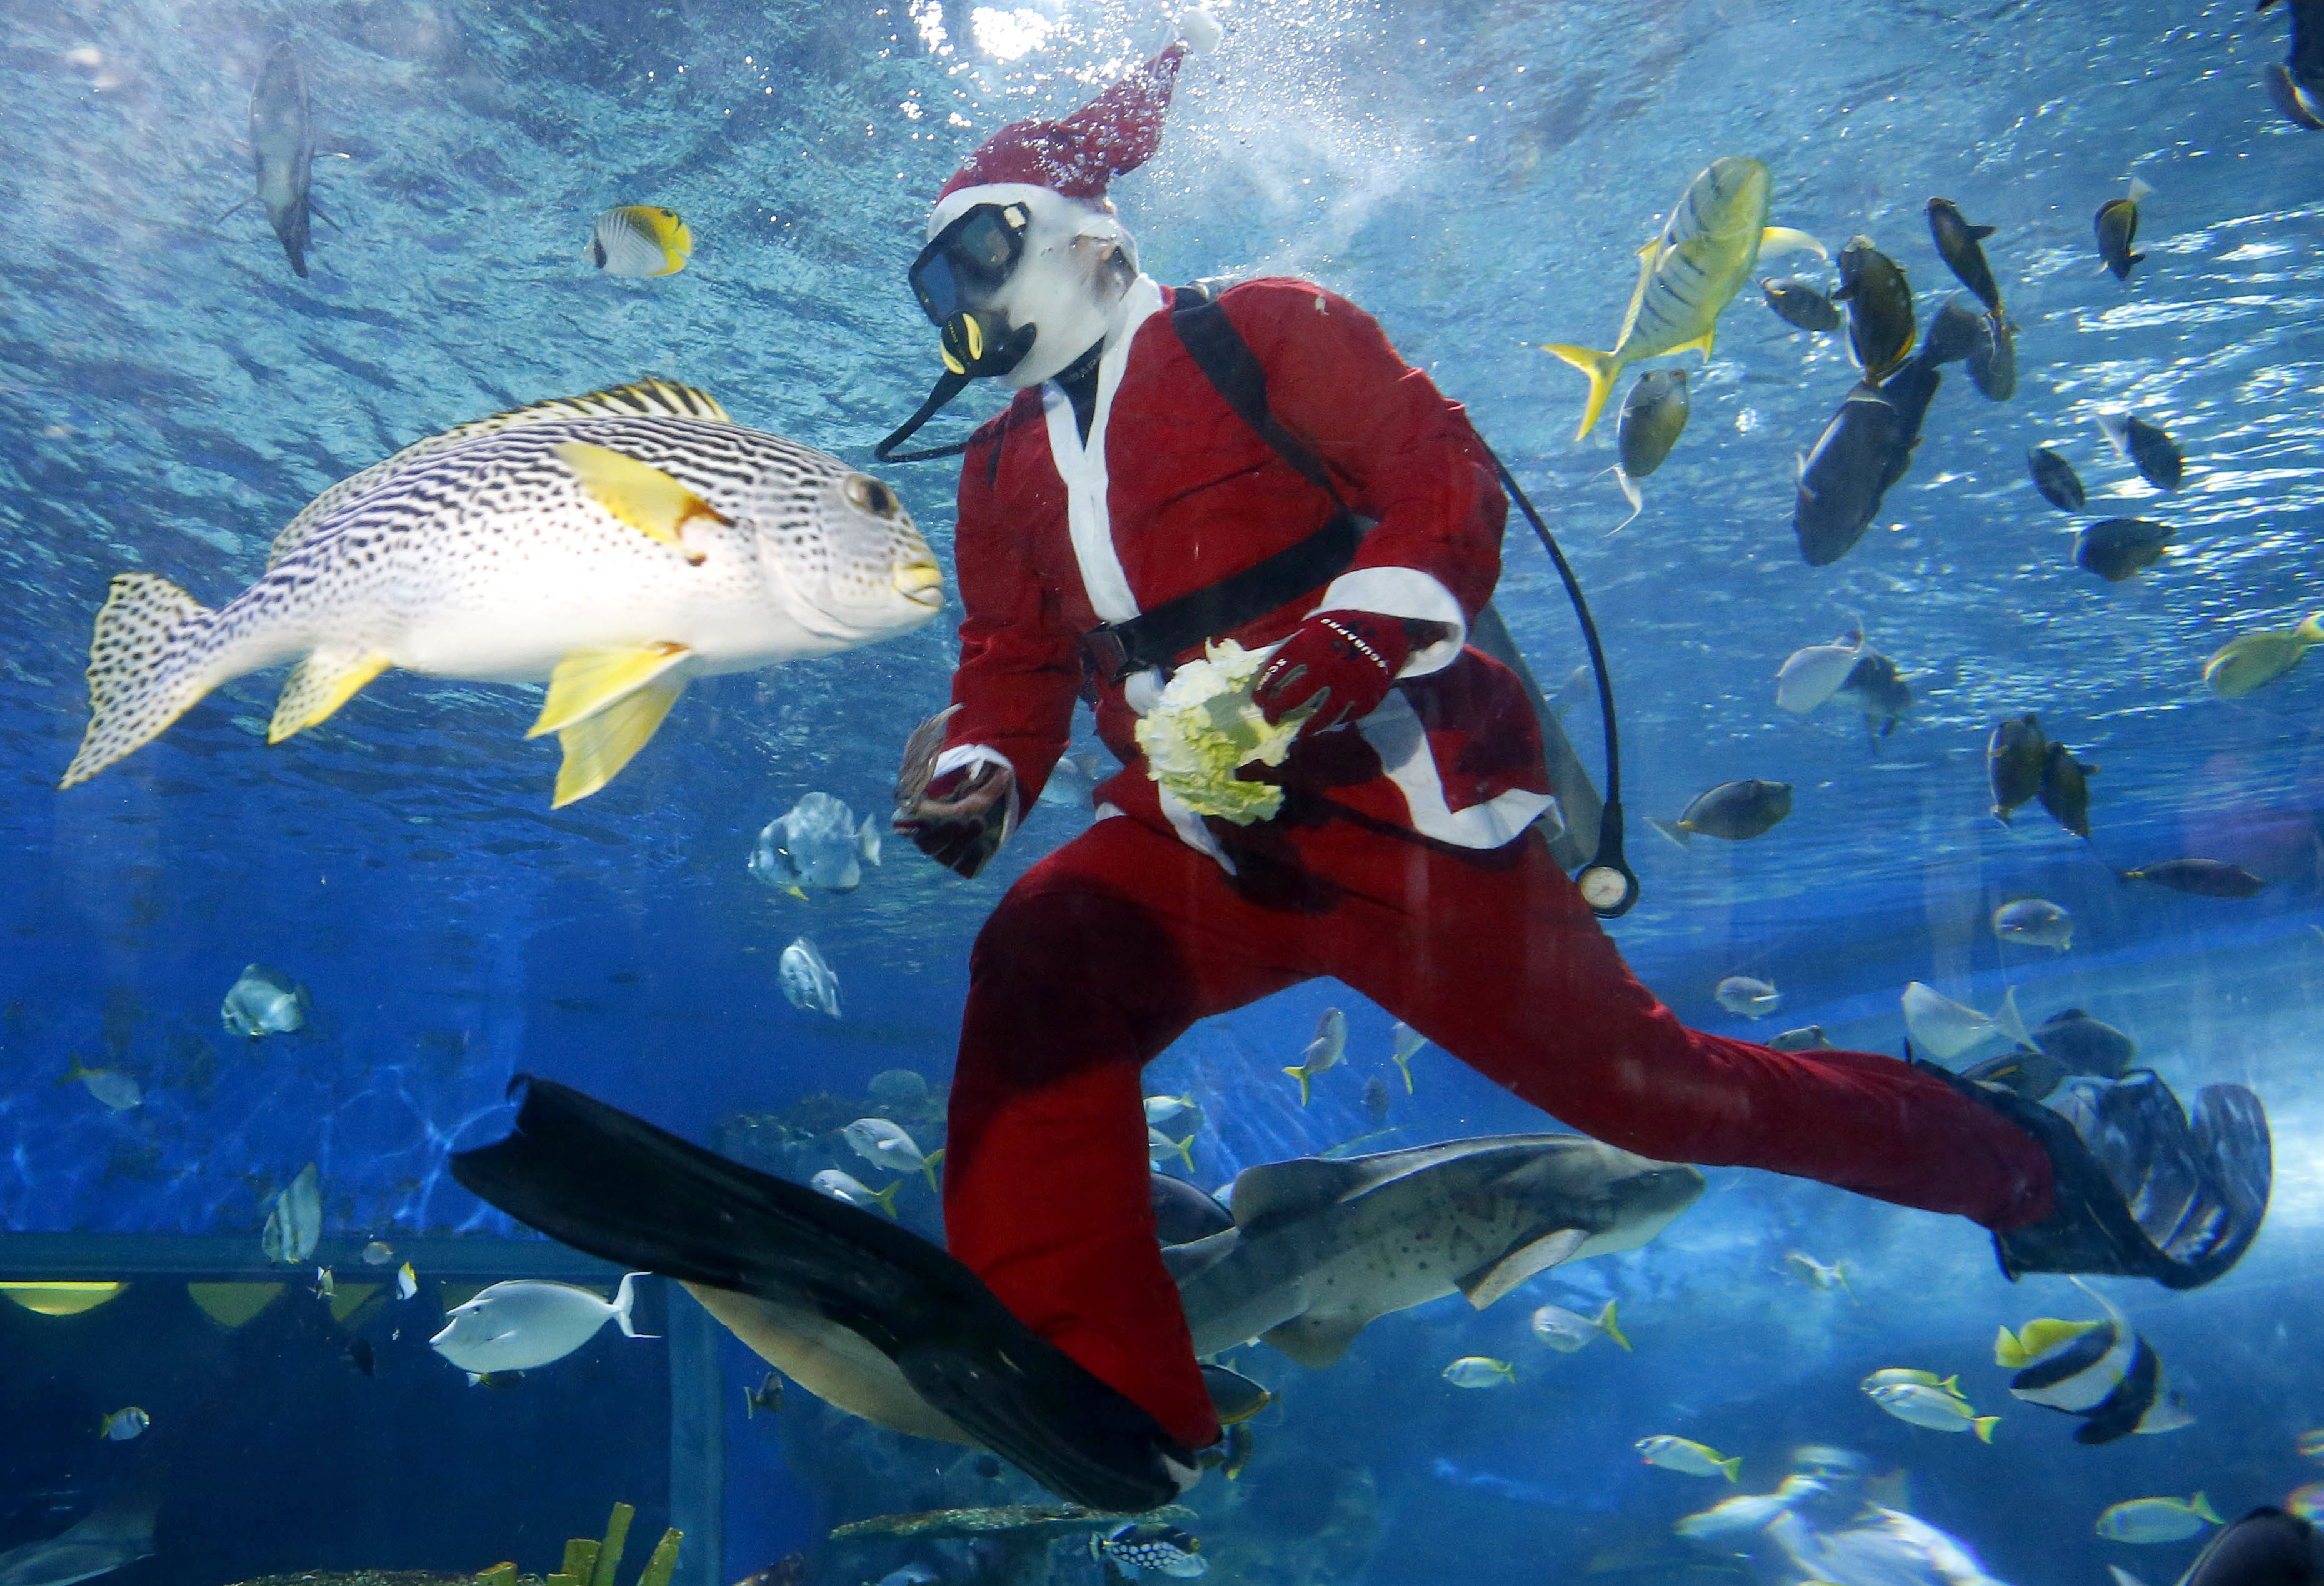 A diver dressed in a Santa costume feeds grouper, stingrays, sharks and other fish at the Manila Ocean Park, the country's largest oceanarium, Friday, Dec. 15, 2017 in Manila, Philippines. With a few days left before Christmas, various malls and other business establishments come up with their own way of attracting patrons such as bazaars, Christmas displays and even free concerts. (AP Photo/Bullit Marquez)